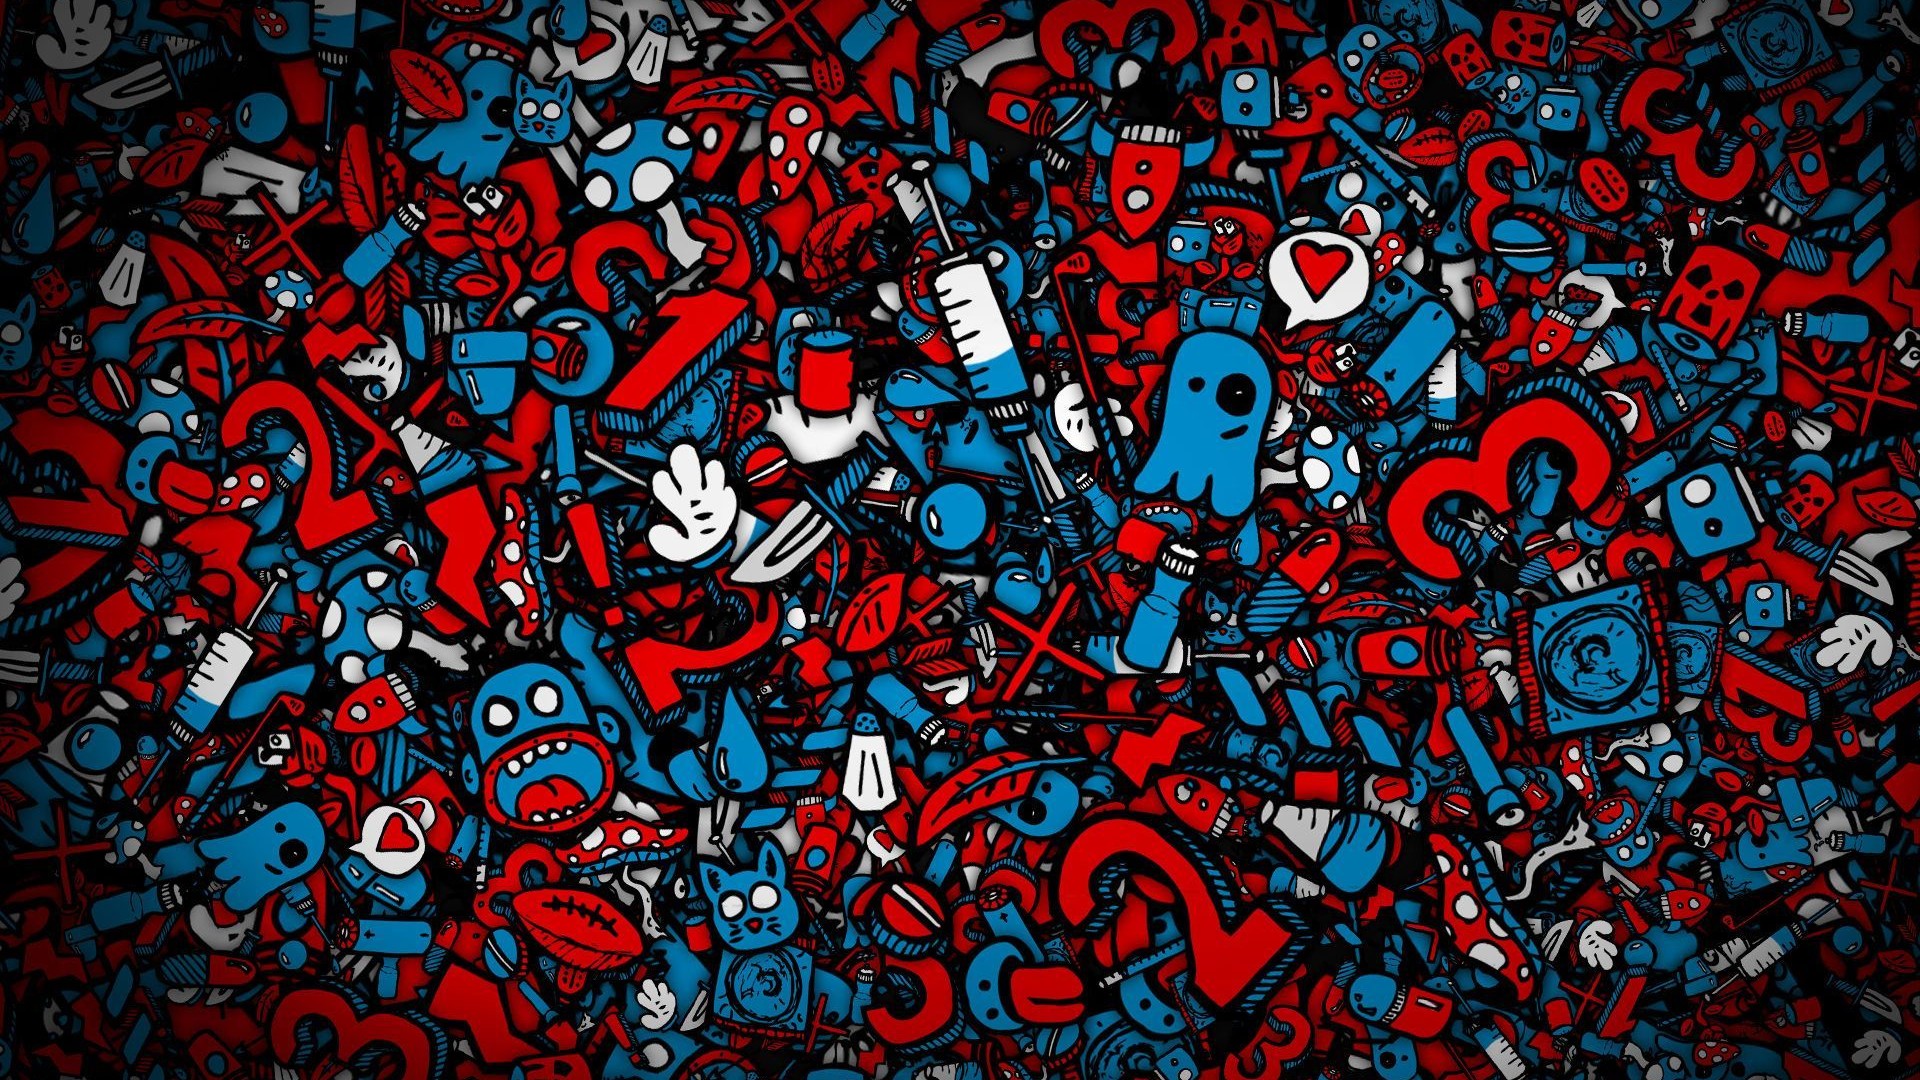 Desktop Wallpaper Graffiti Font with resolution 1920X1080 pixel. You can use this wallpaper as background for your desktop Computer Screensavers, Android or iPhone smartphones